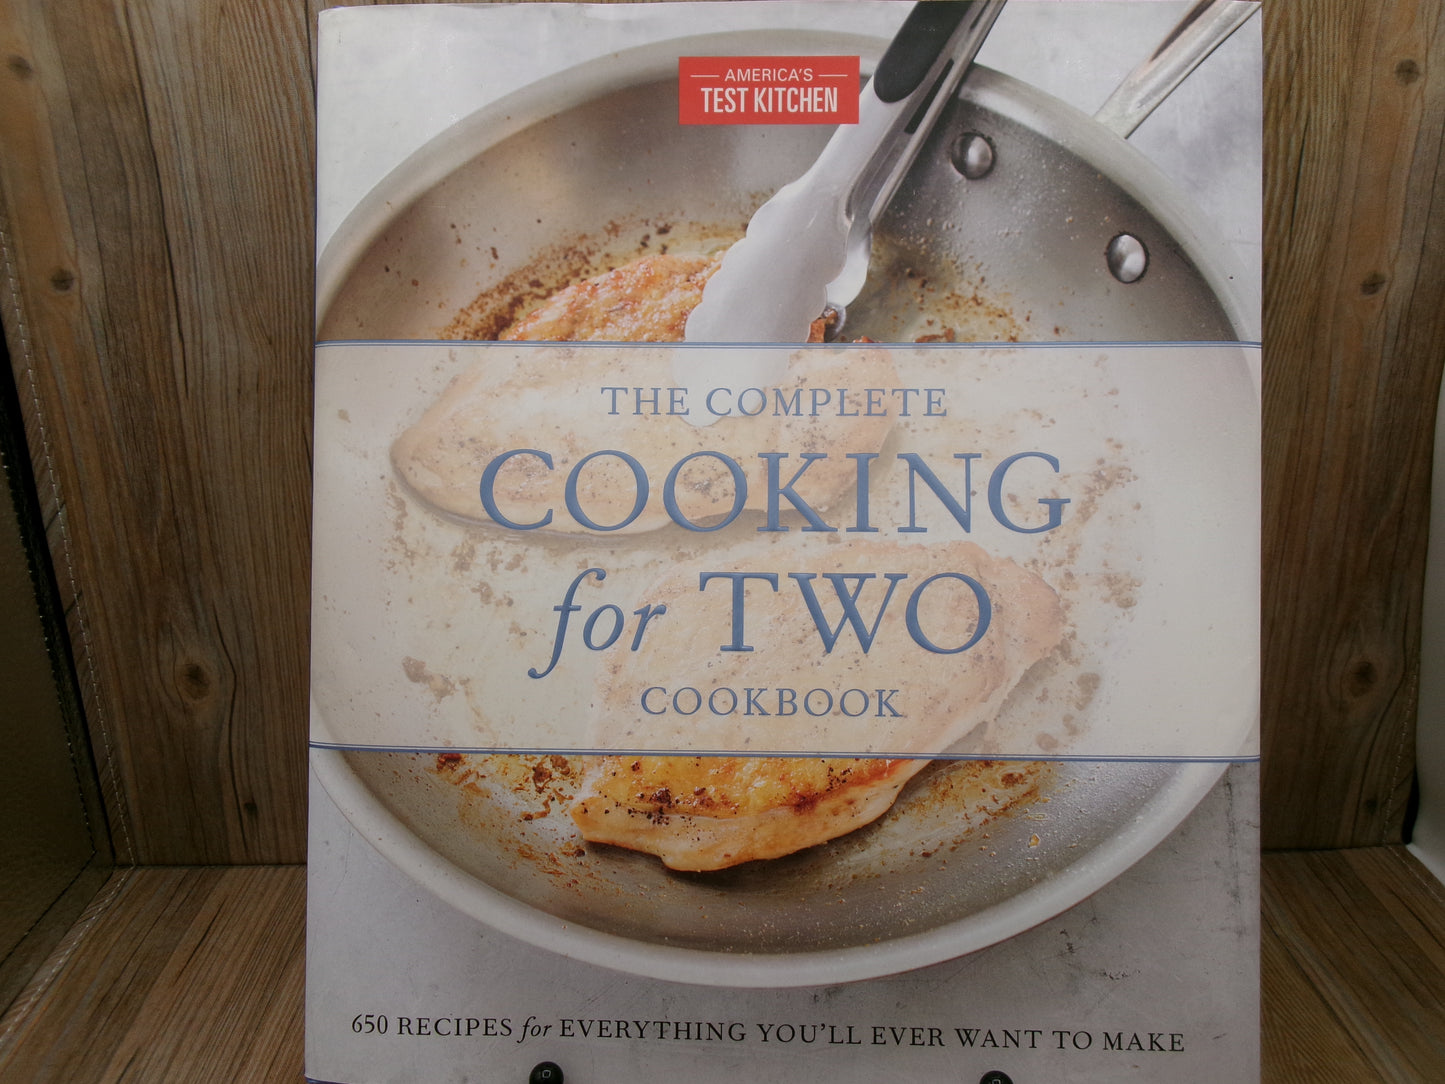 The Complete Cooking for Two Cookbook by America's Test Kitchen